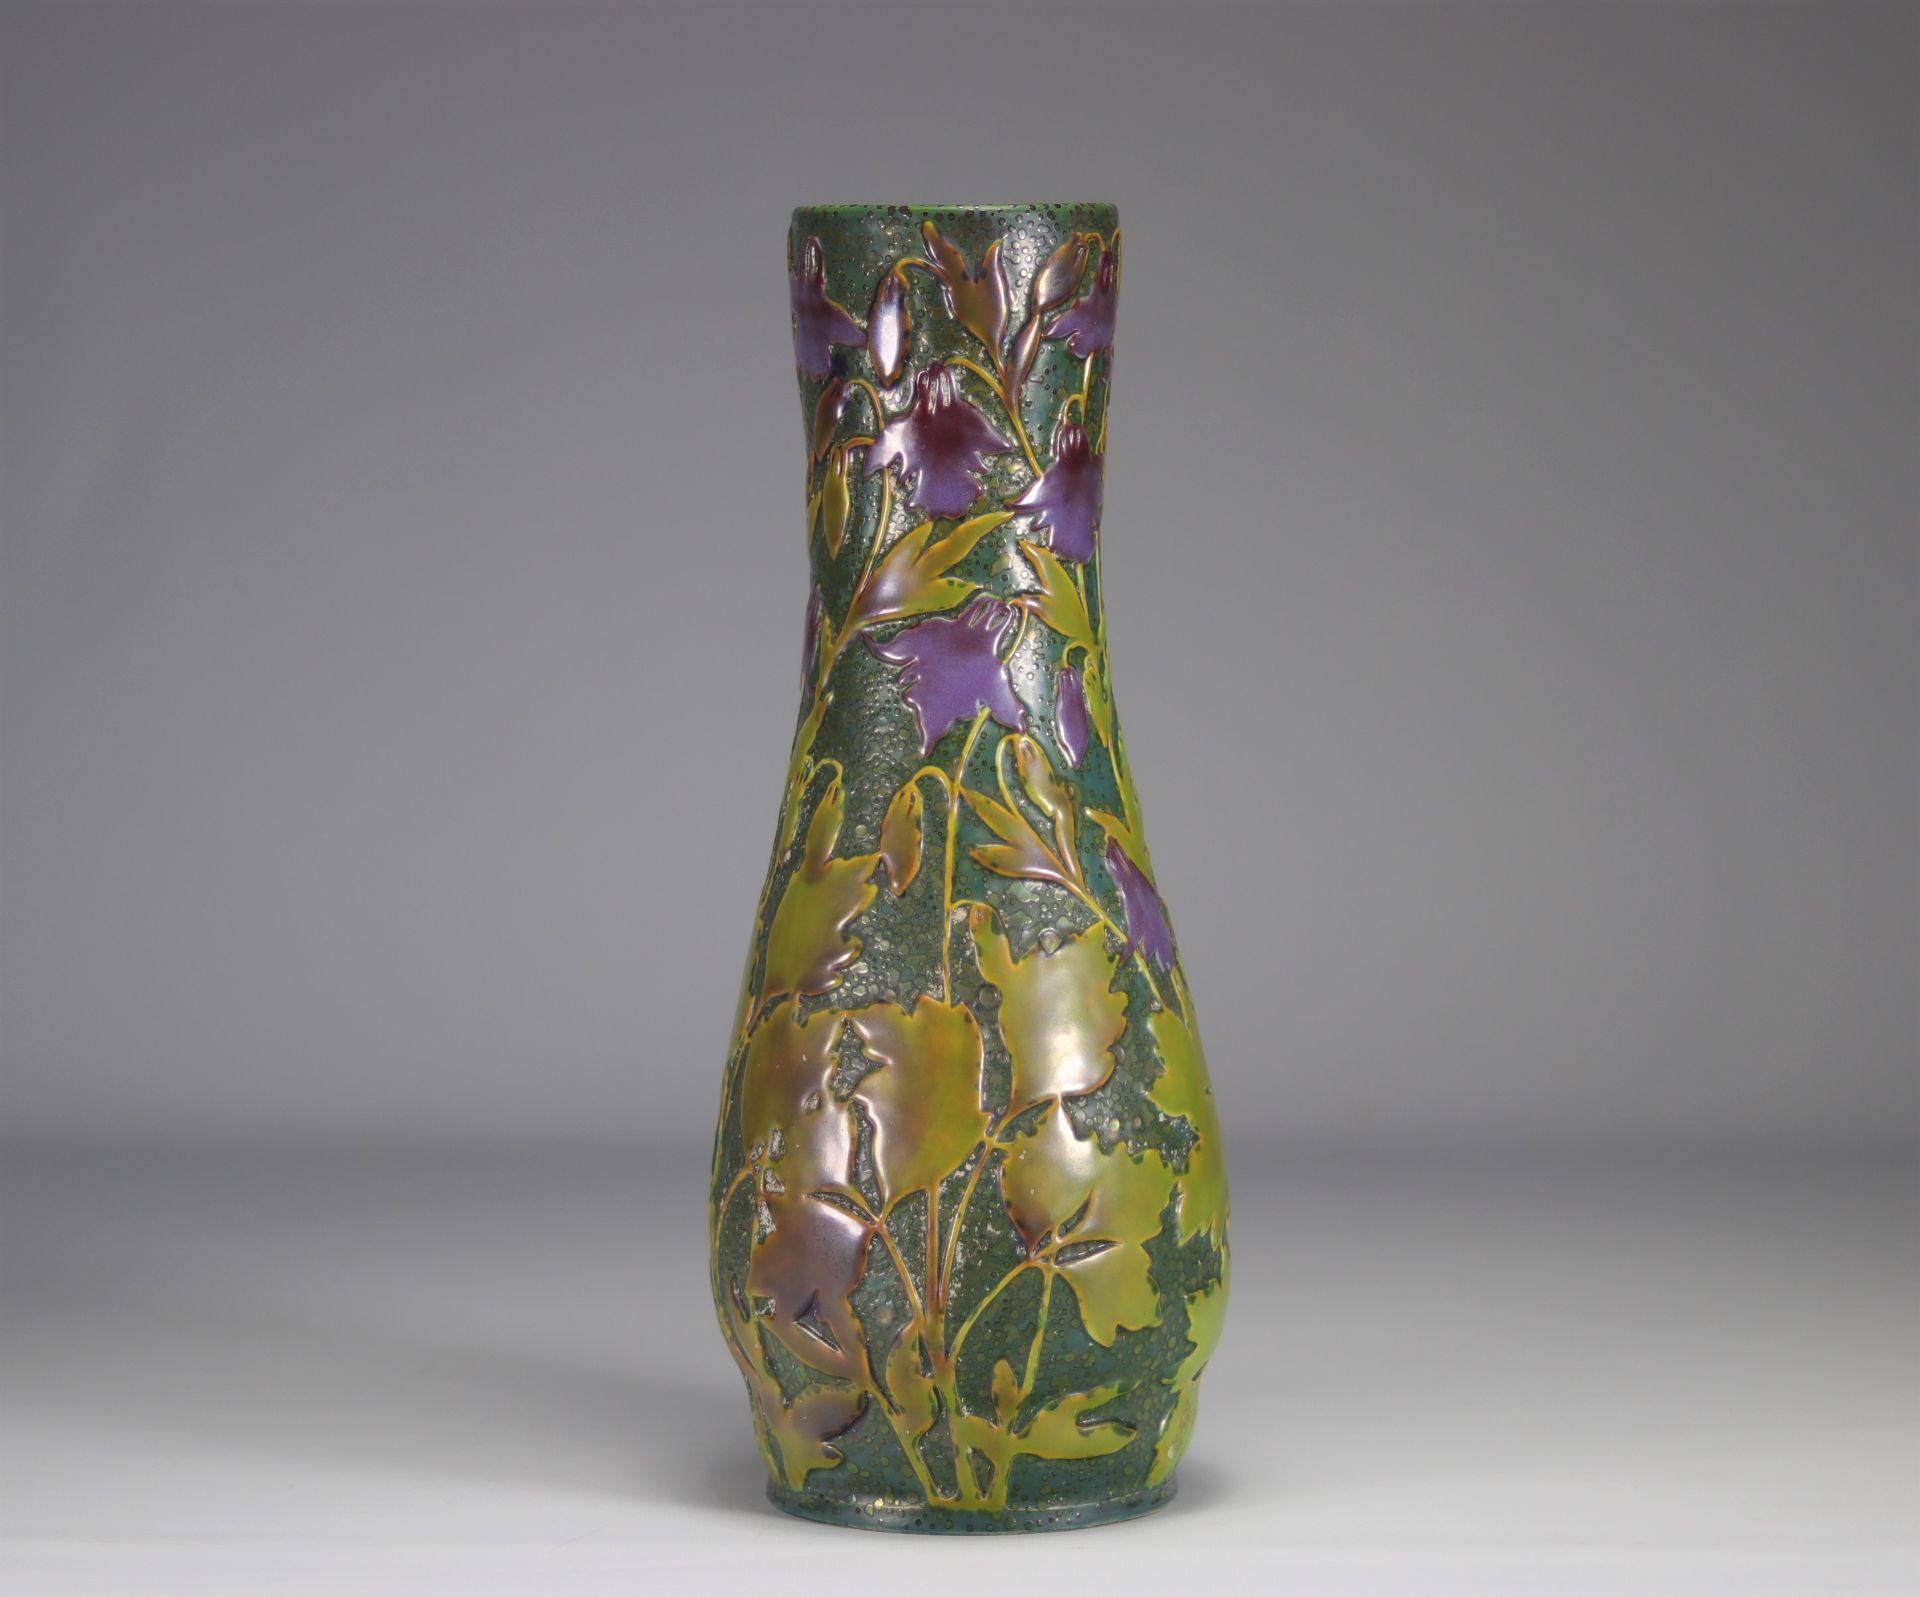 Vilmos ZSOLNAY (1840 - 1900) rare Art Nouveau vase decorated with purple flowers on a green backgrou - Image 4 of 6